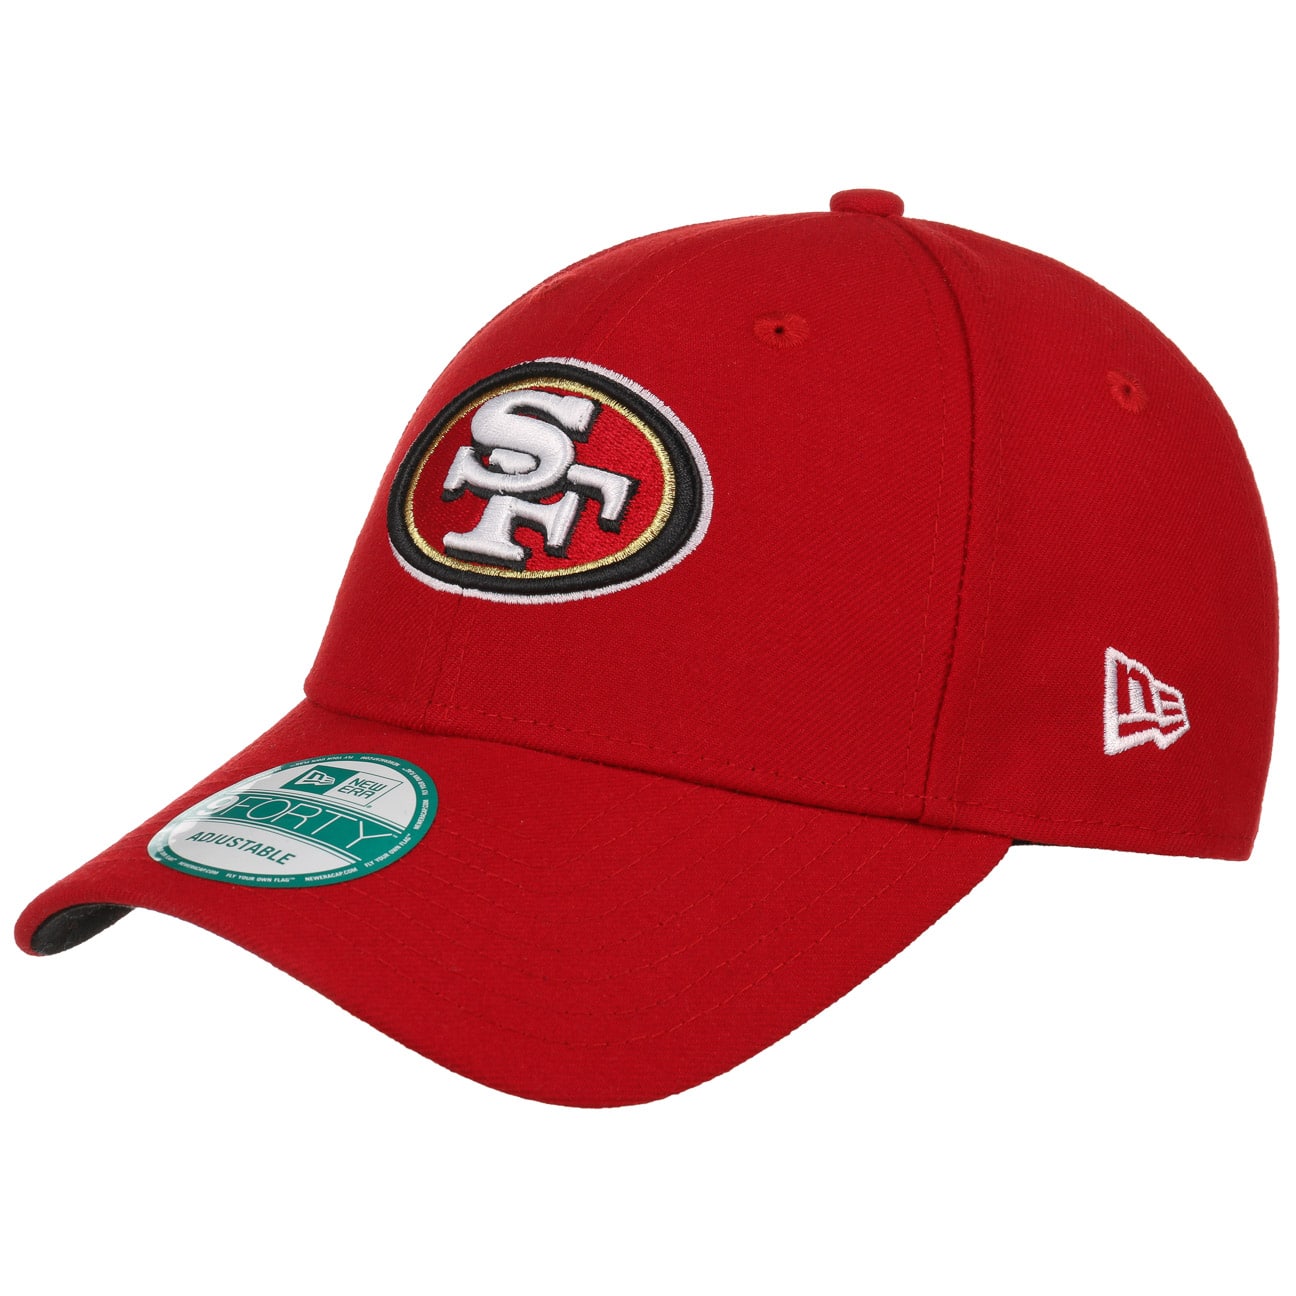 New Era San Francisco 49ers 9forty unisex cap in red